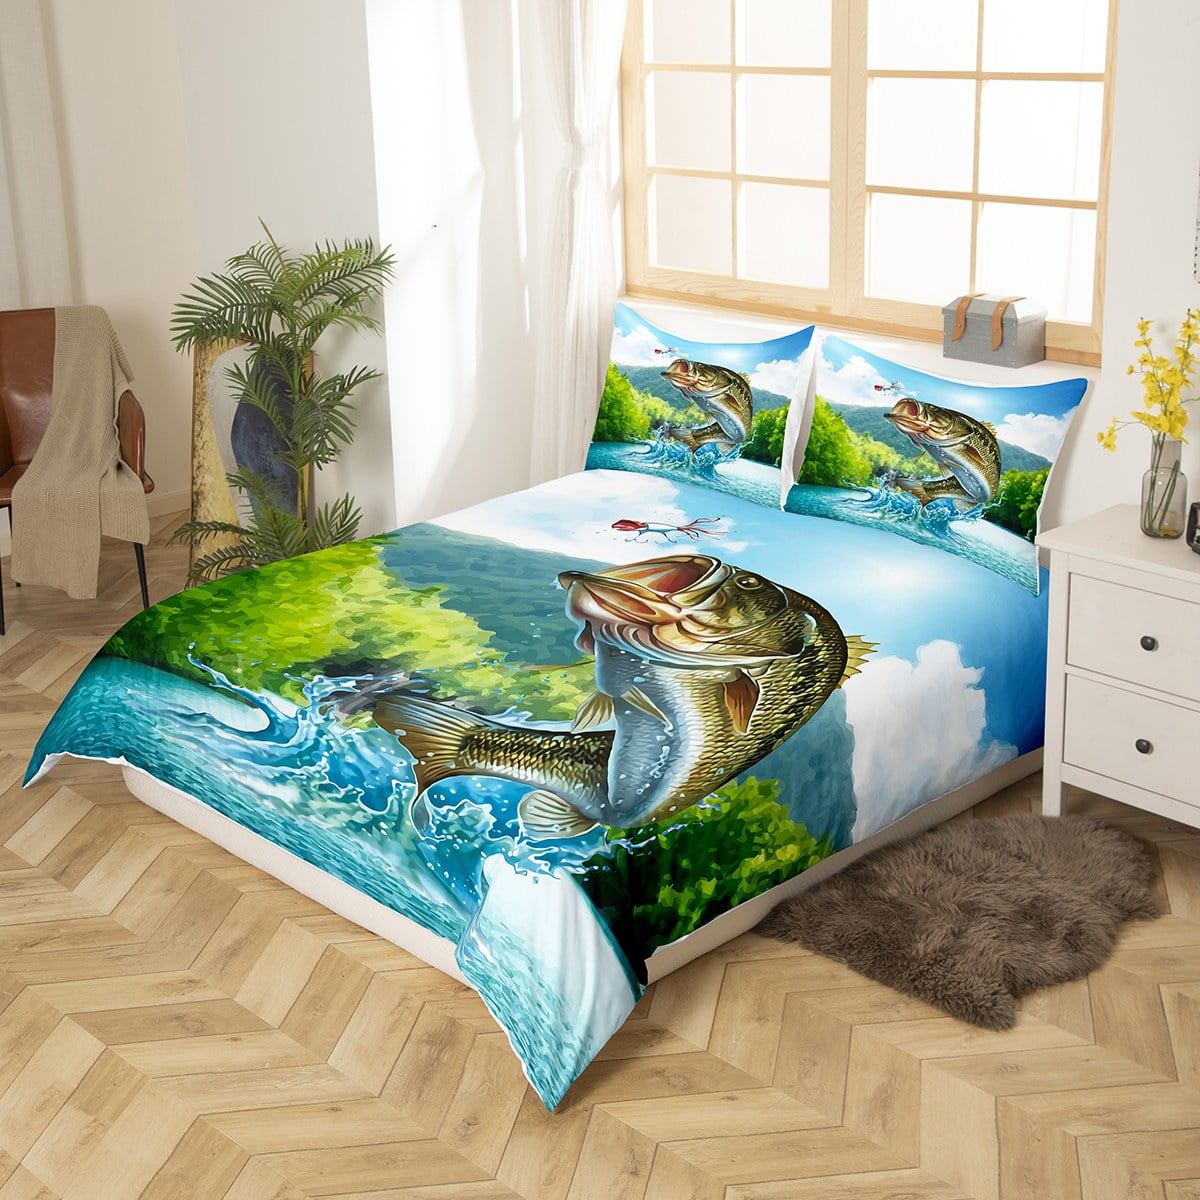 YST Kids Big Bass Fish Bedding Set Teen Boys Fishing Comforter Cover Rustic  Farmhouse Woodland Duvet Cover Queen,Eat Small Fish Quilt Cover Cabin Lodge  Decor With Zipper 2 Pillow Cases 